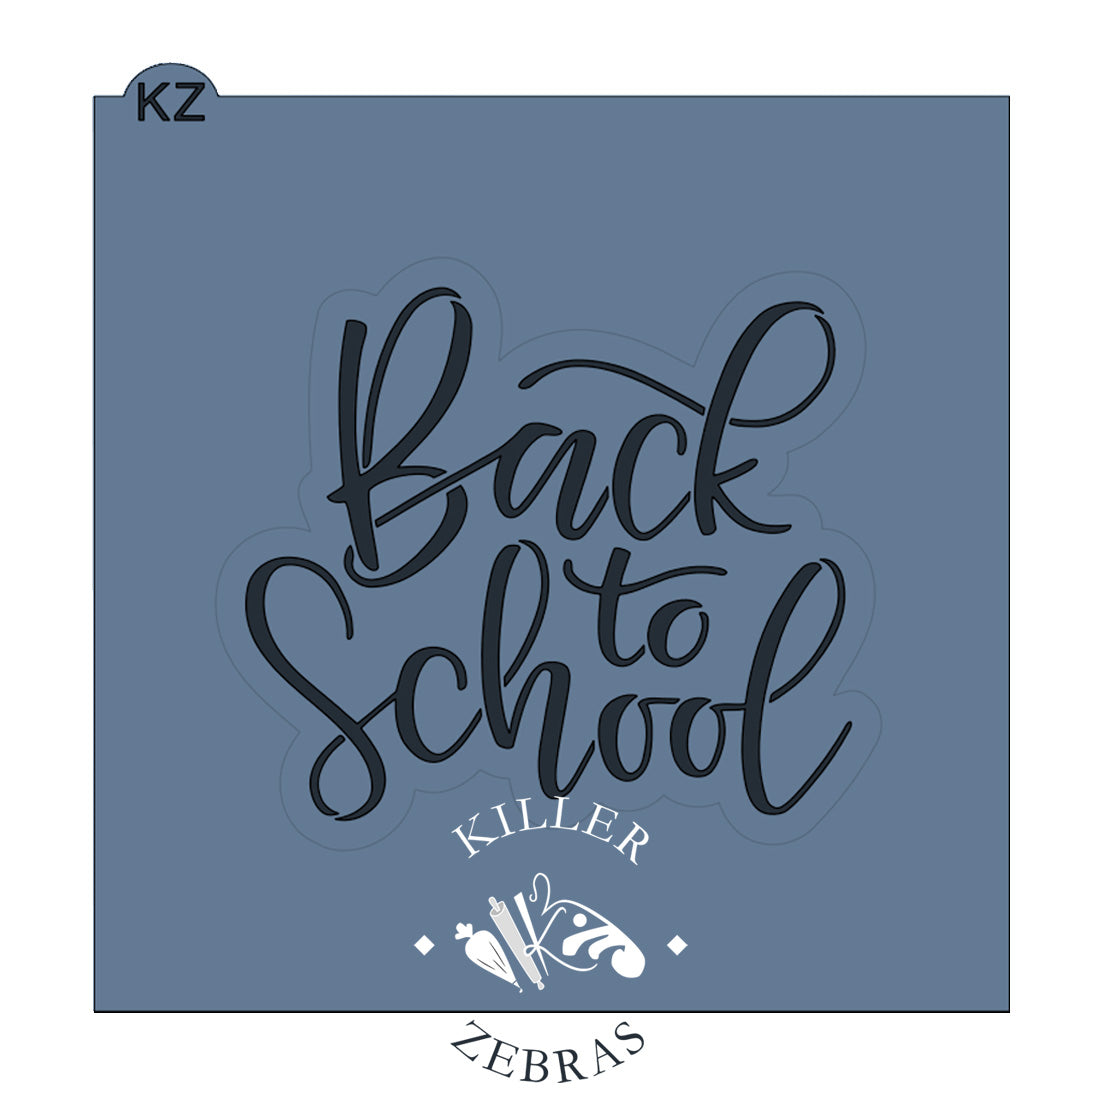 Back To School Hand Lettered